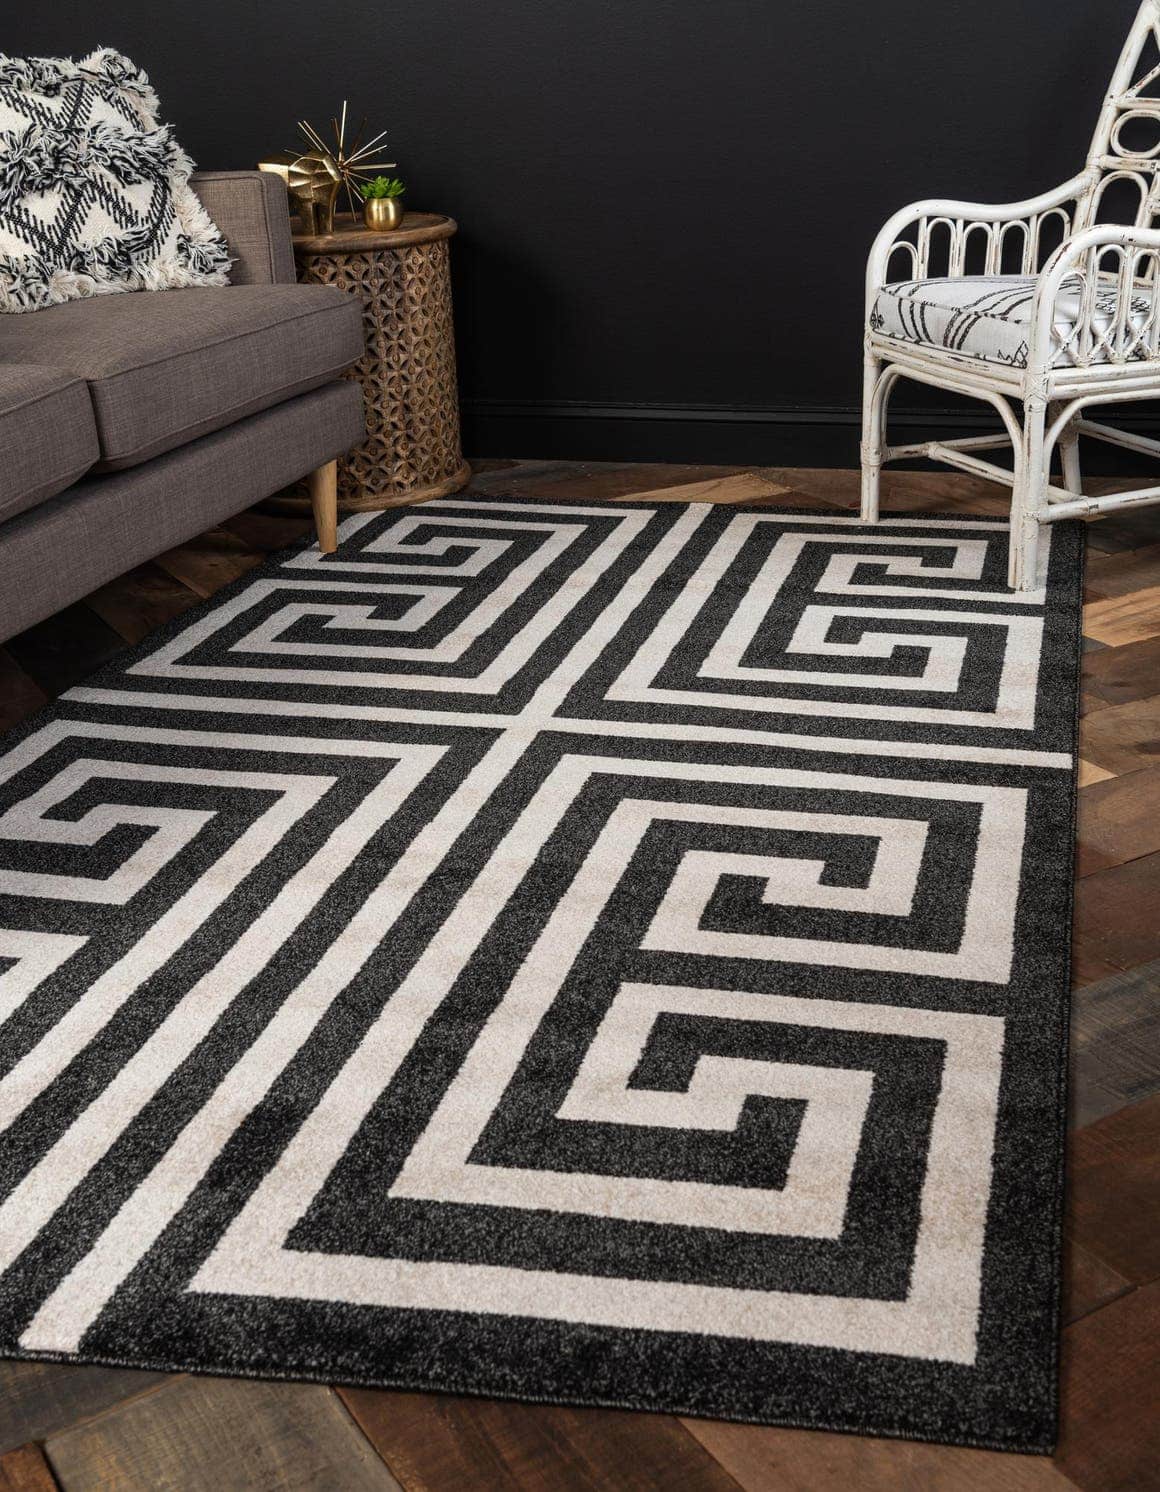 25 Gorgeous Rugs That Go With Grey Couches, Grey And White Rugs For Living Room